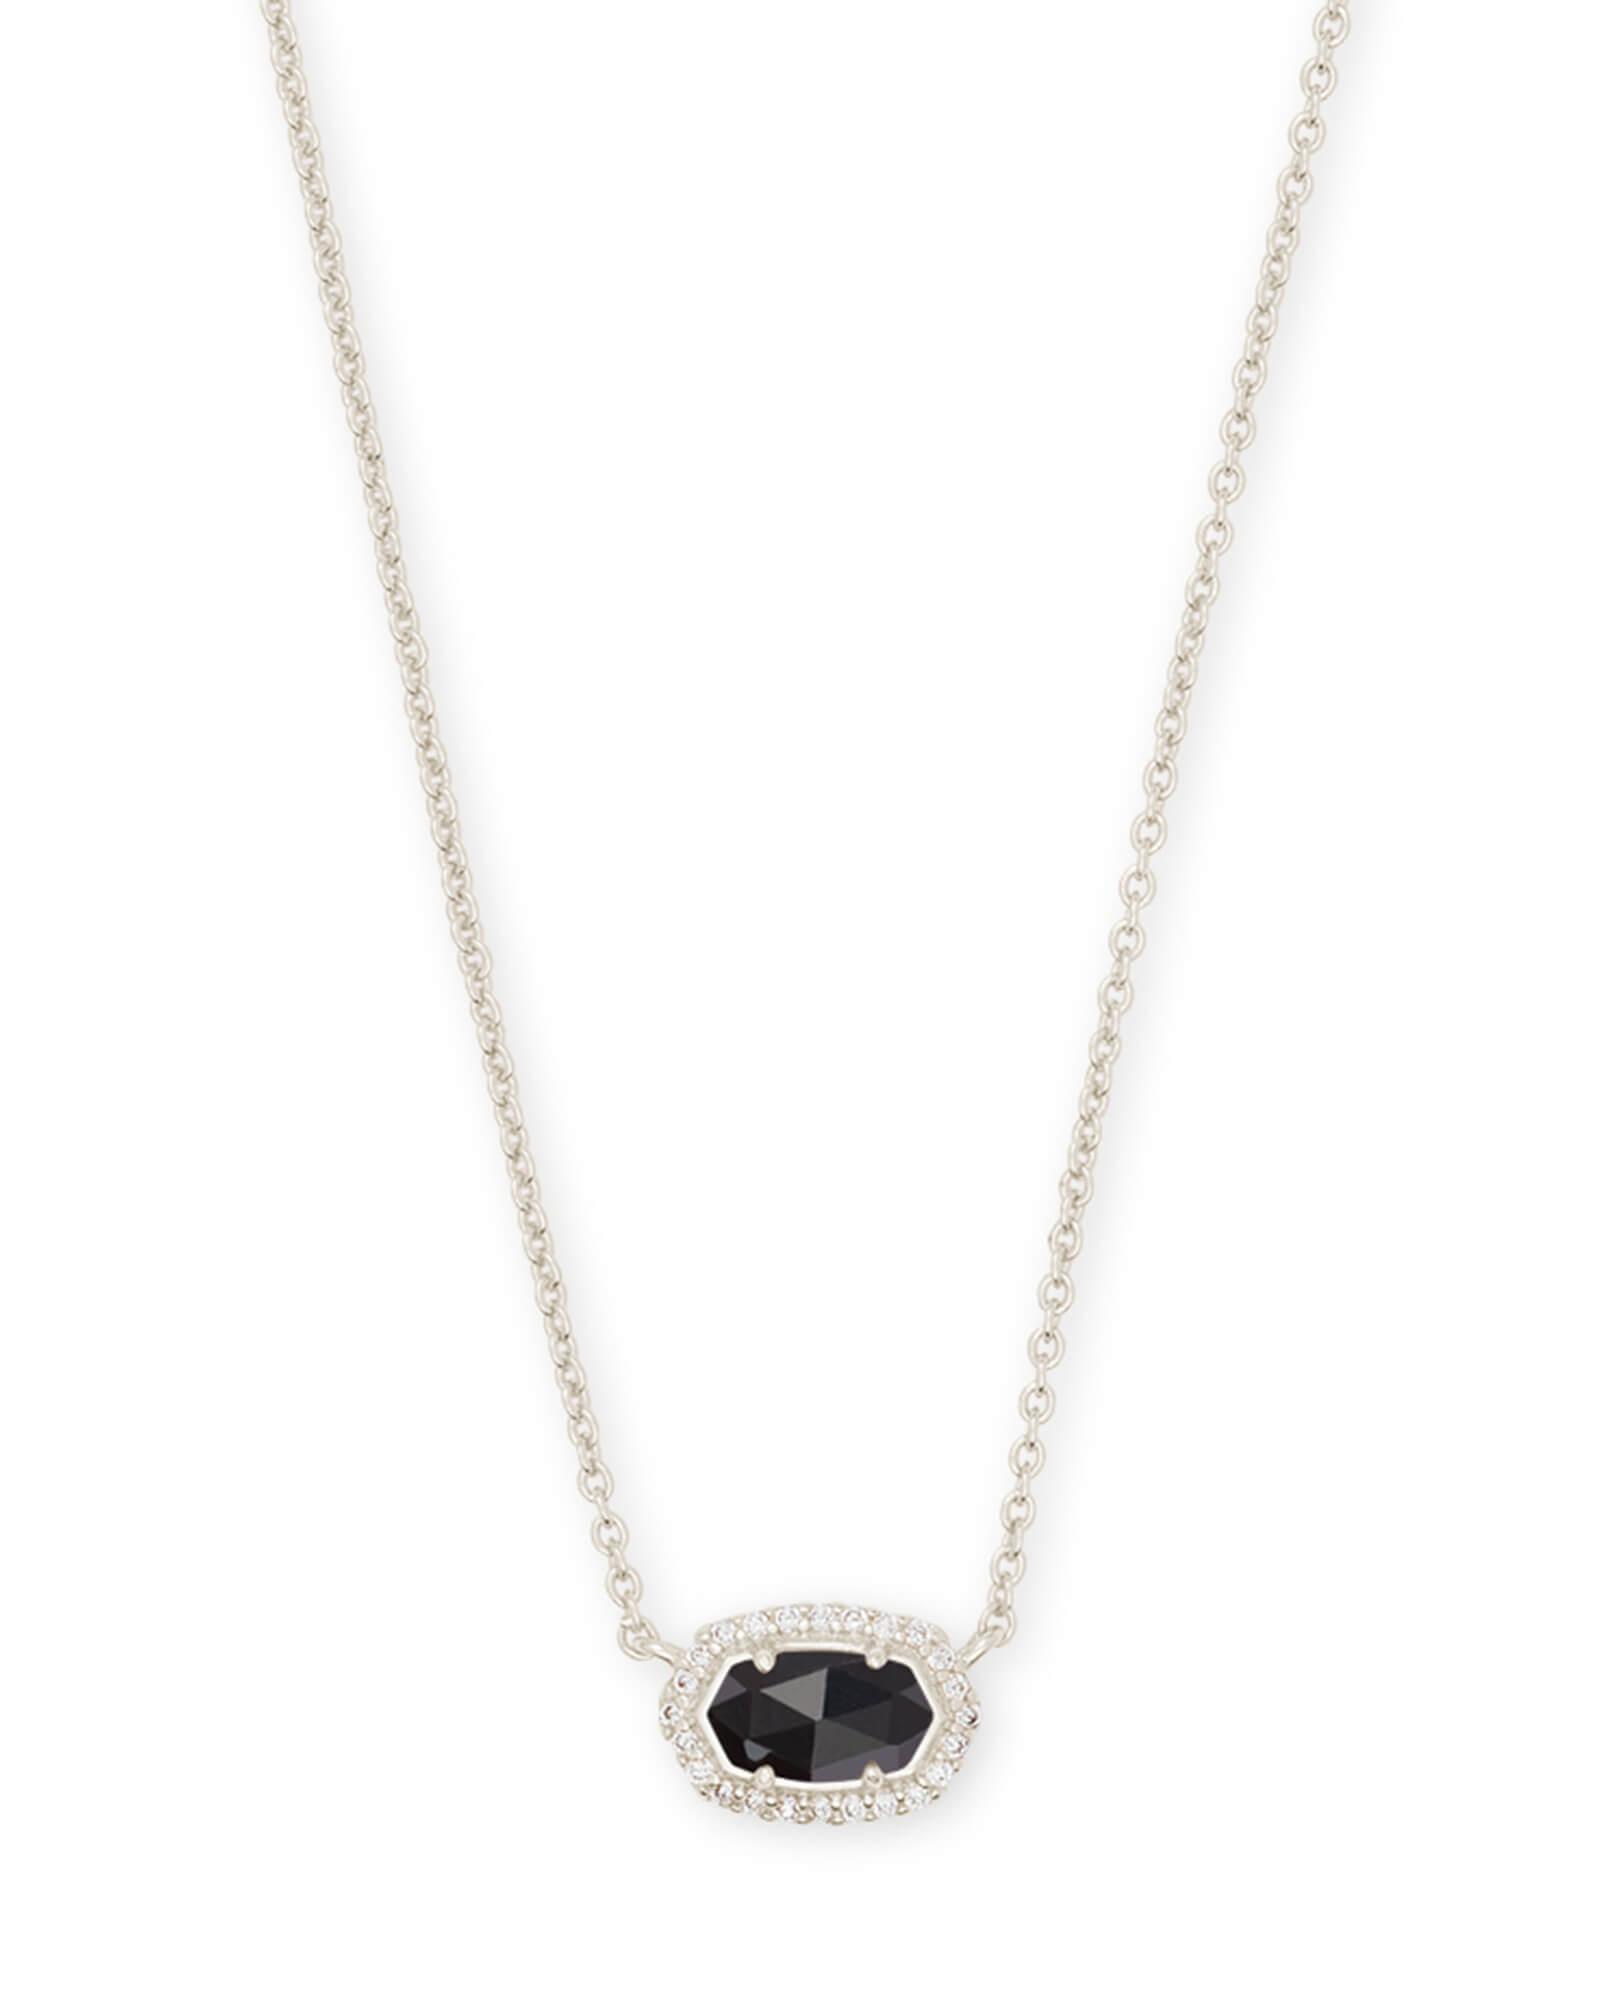 Kendra Scott Chelsea Silver Pendant Necklace in Black - Save 25% - Lyst